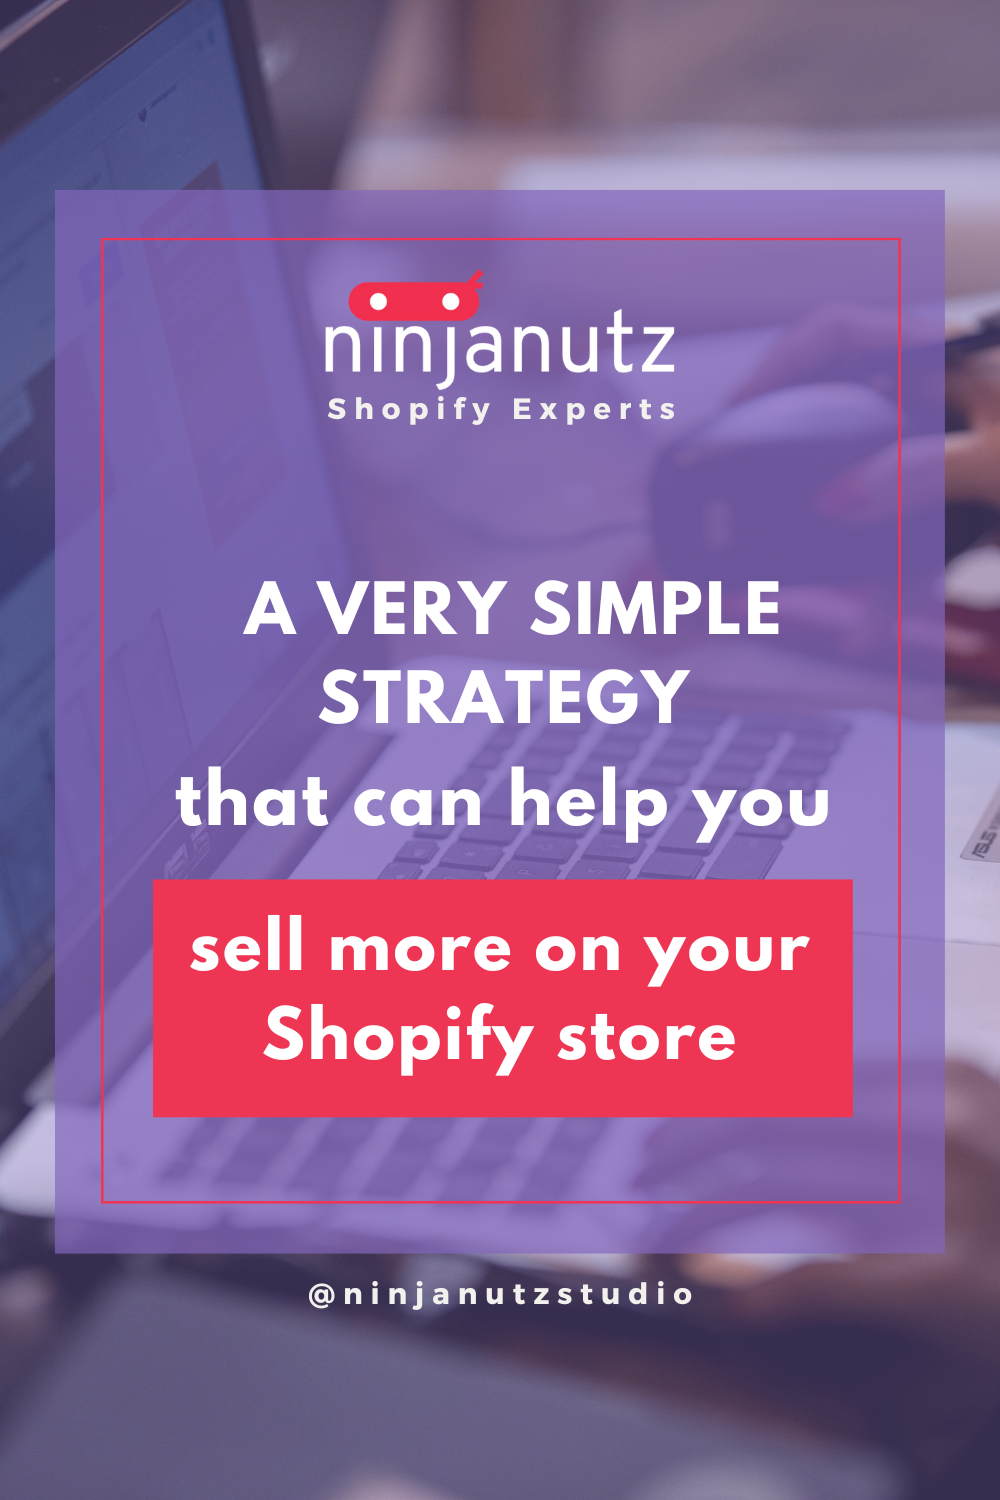 A very simple strategy that can help you sell more on your Shopify store